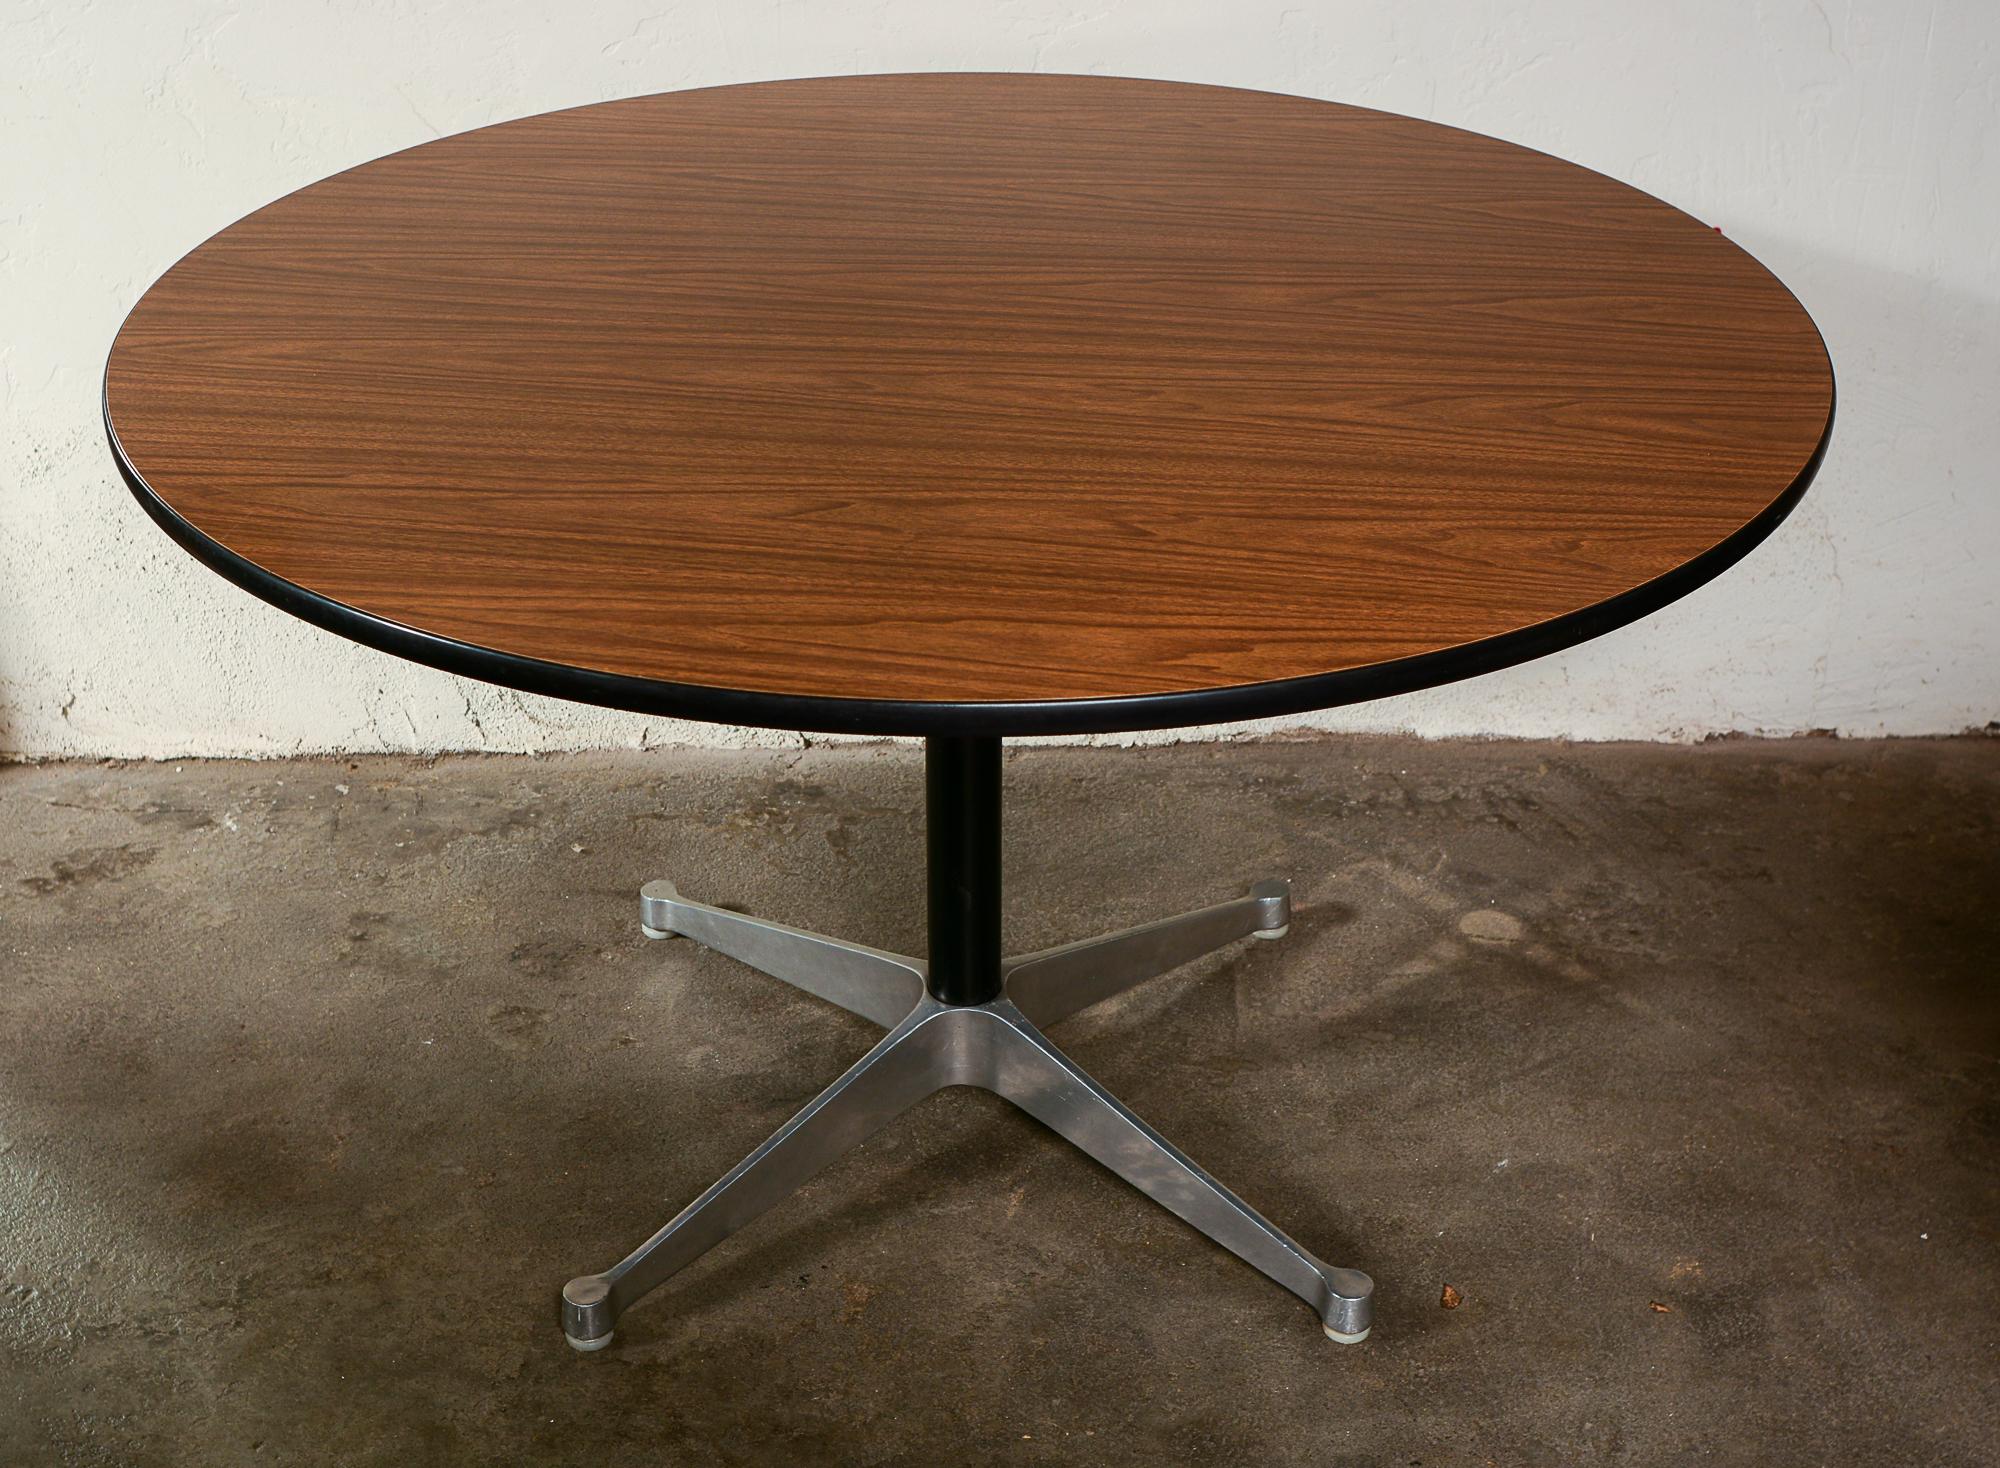 Contract base dining table by Charles and Ray Eames. This table has the earlier aluminum group base. The top is a faux wood grain laminate. The table has the round black medal label. There is a little wear to the rubber edge. The aluminum base has